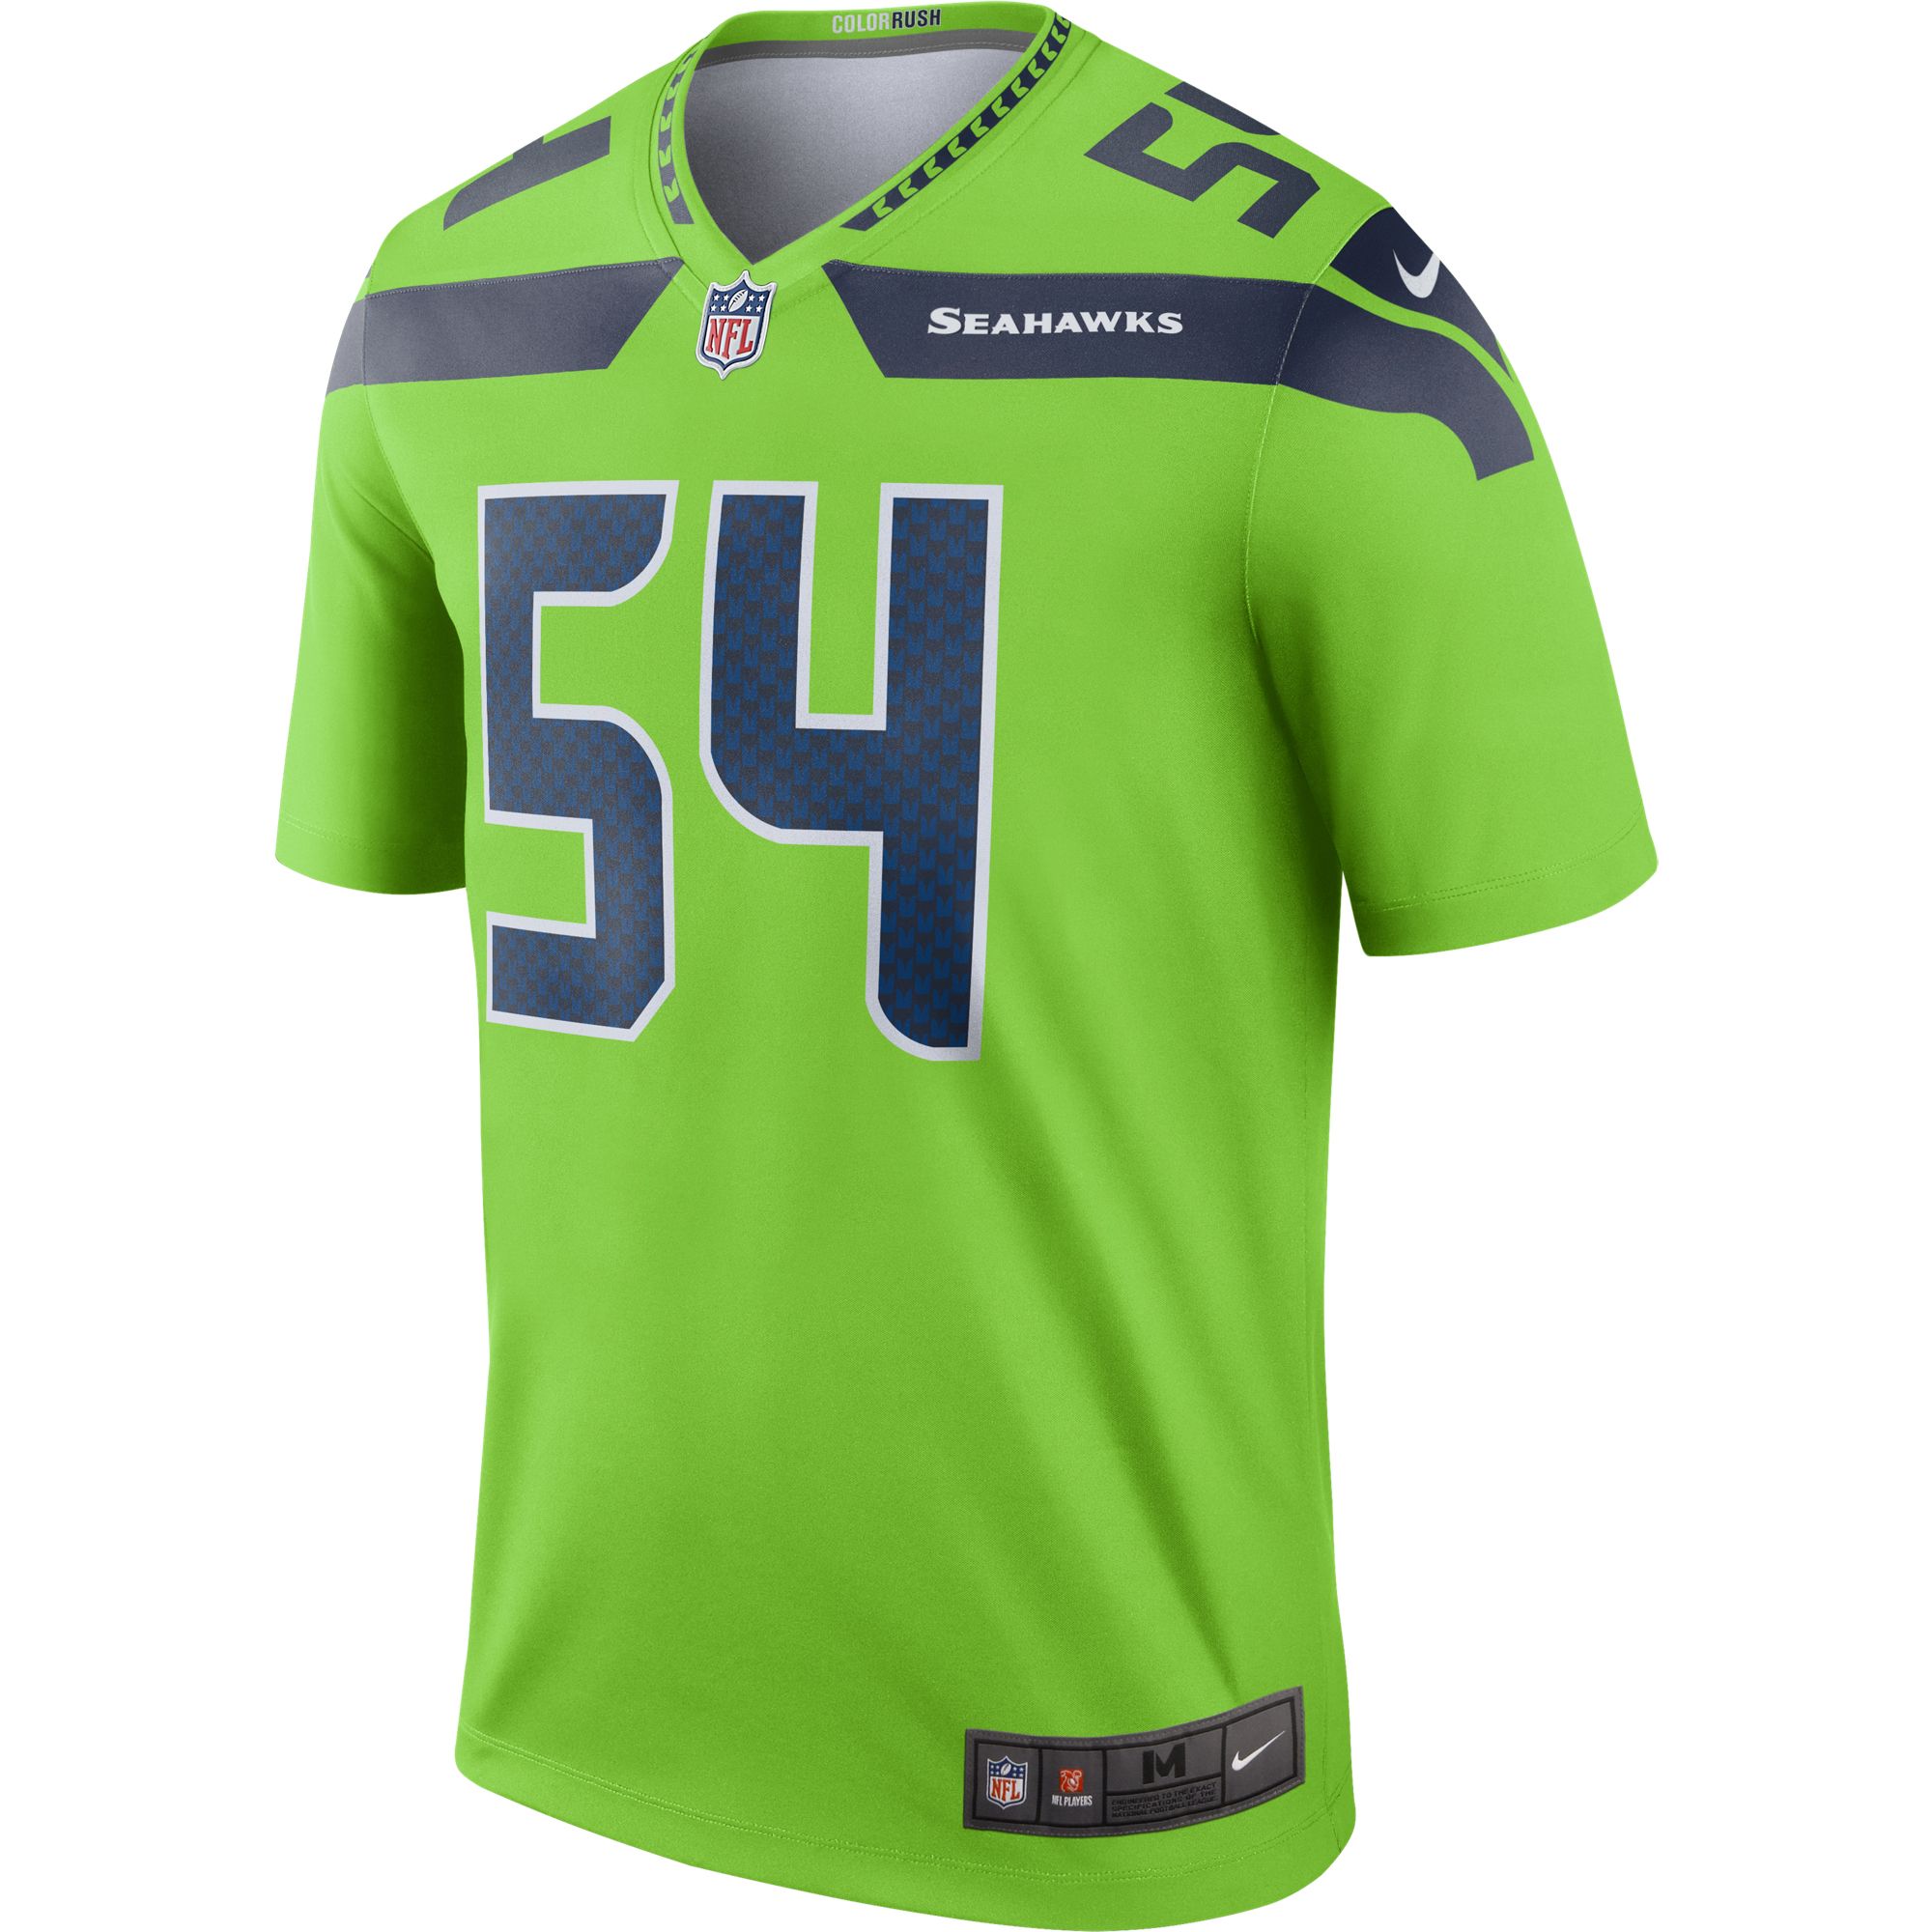 bobby wagner youth jersey